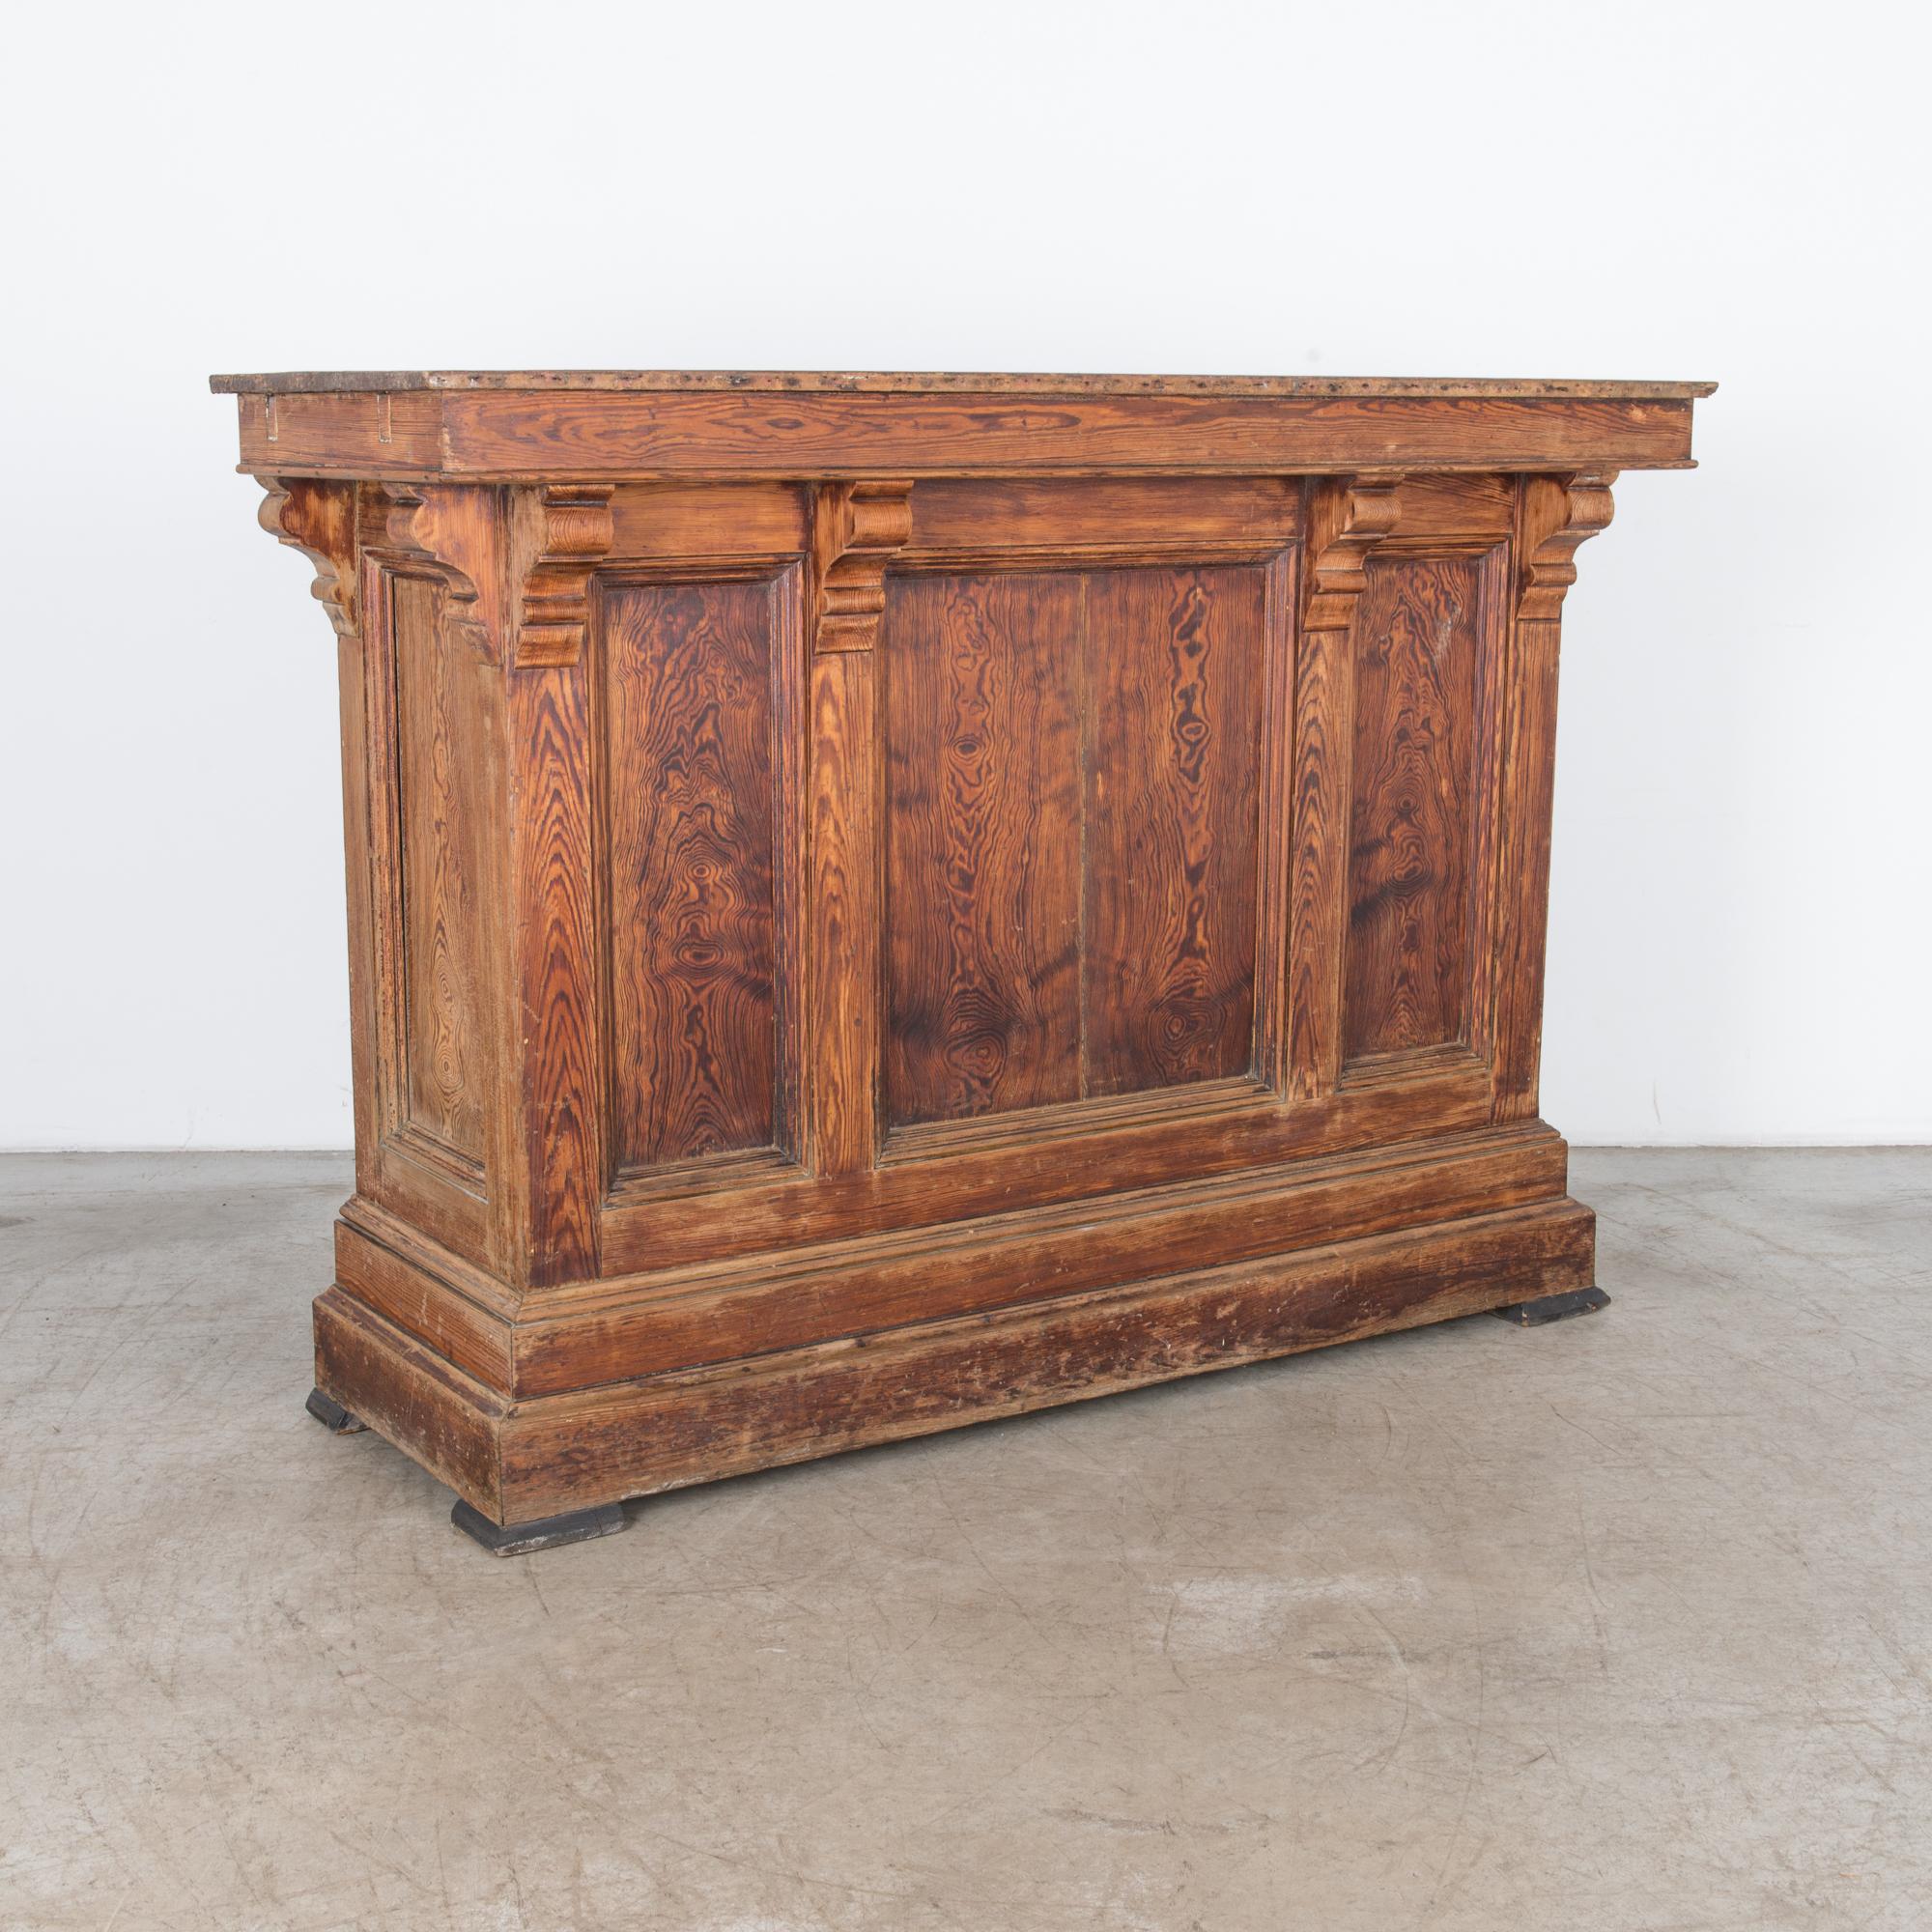 This French shop counter was constructed at the turn of the 19th century. A statement piece in all natural finish, highlighting a unique grain pattern. Rustic and refined construction from front to back, with distinguished corbels and inset